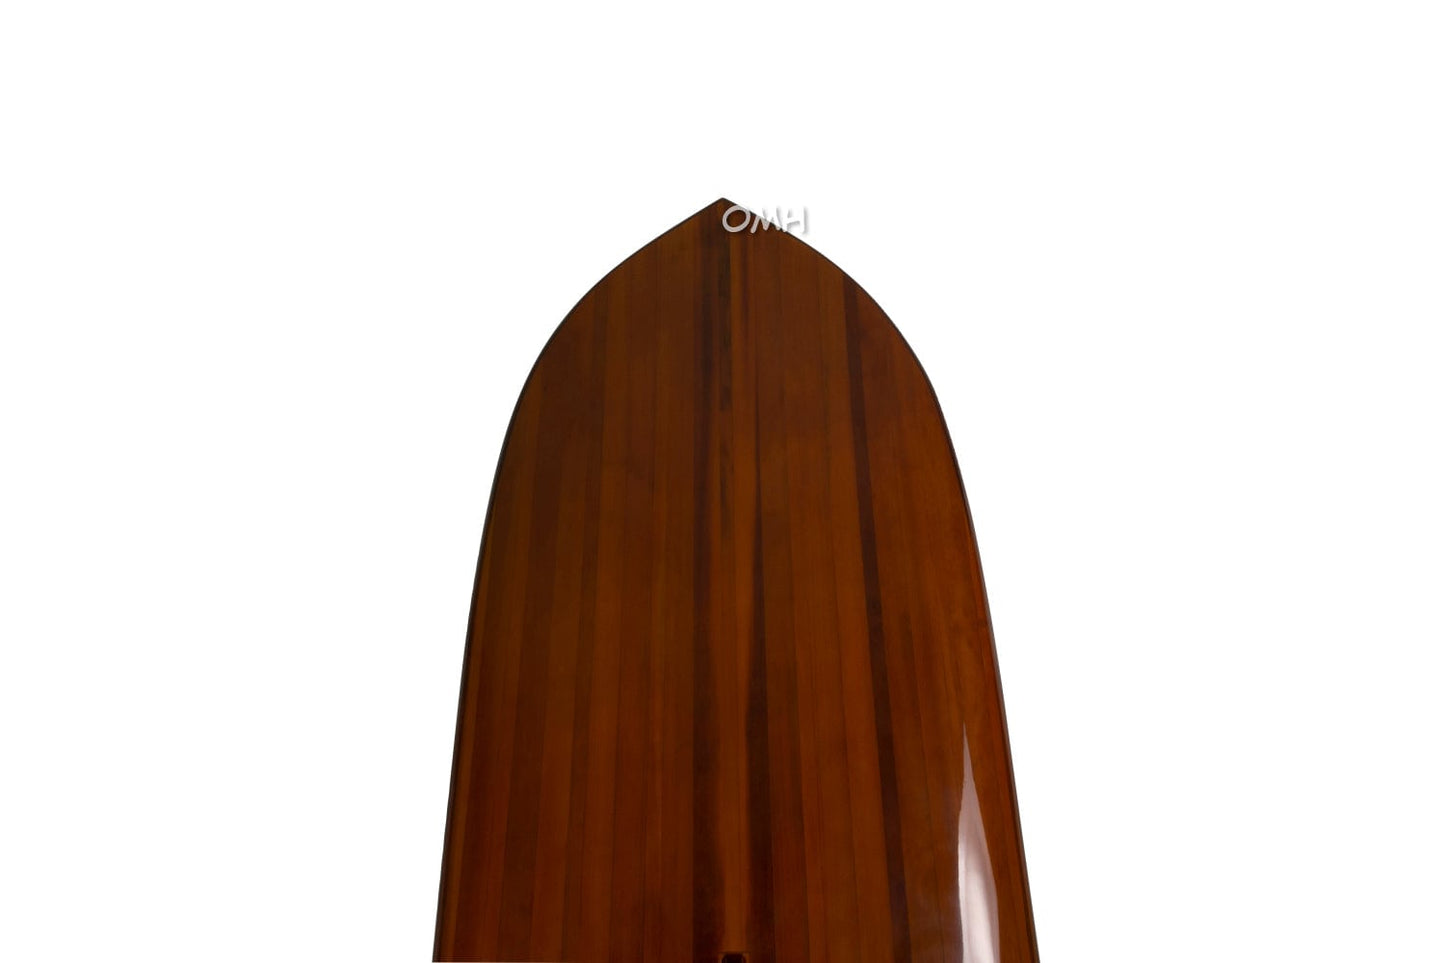 ALDO Creative Arts Collectibles Scale Model Real Fully Functional Paddle Board in Classic Cedarwood Real Wood 11feet with 1 fin